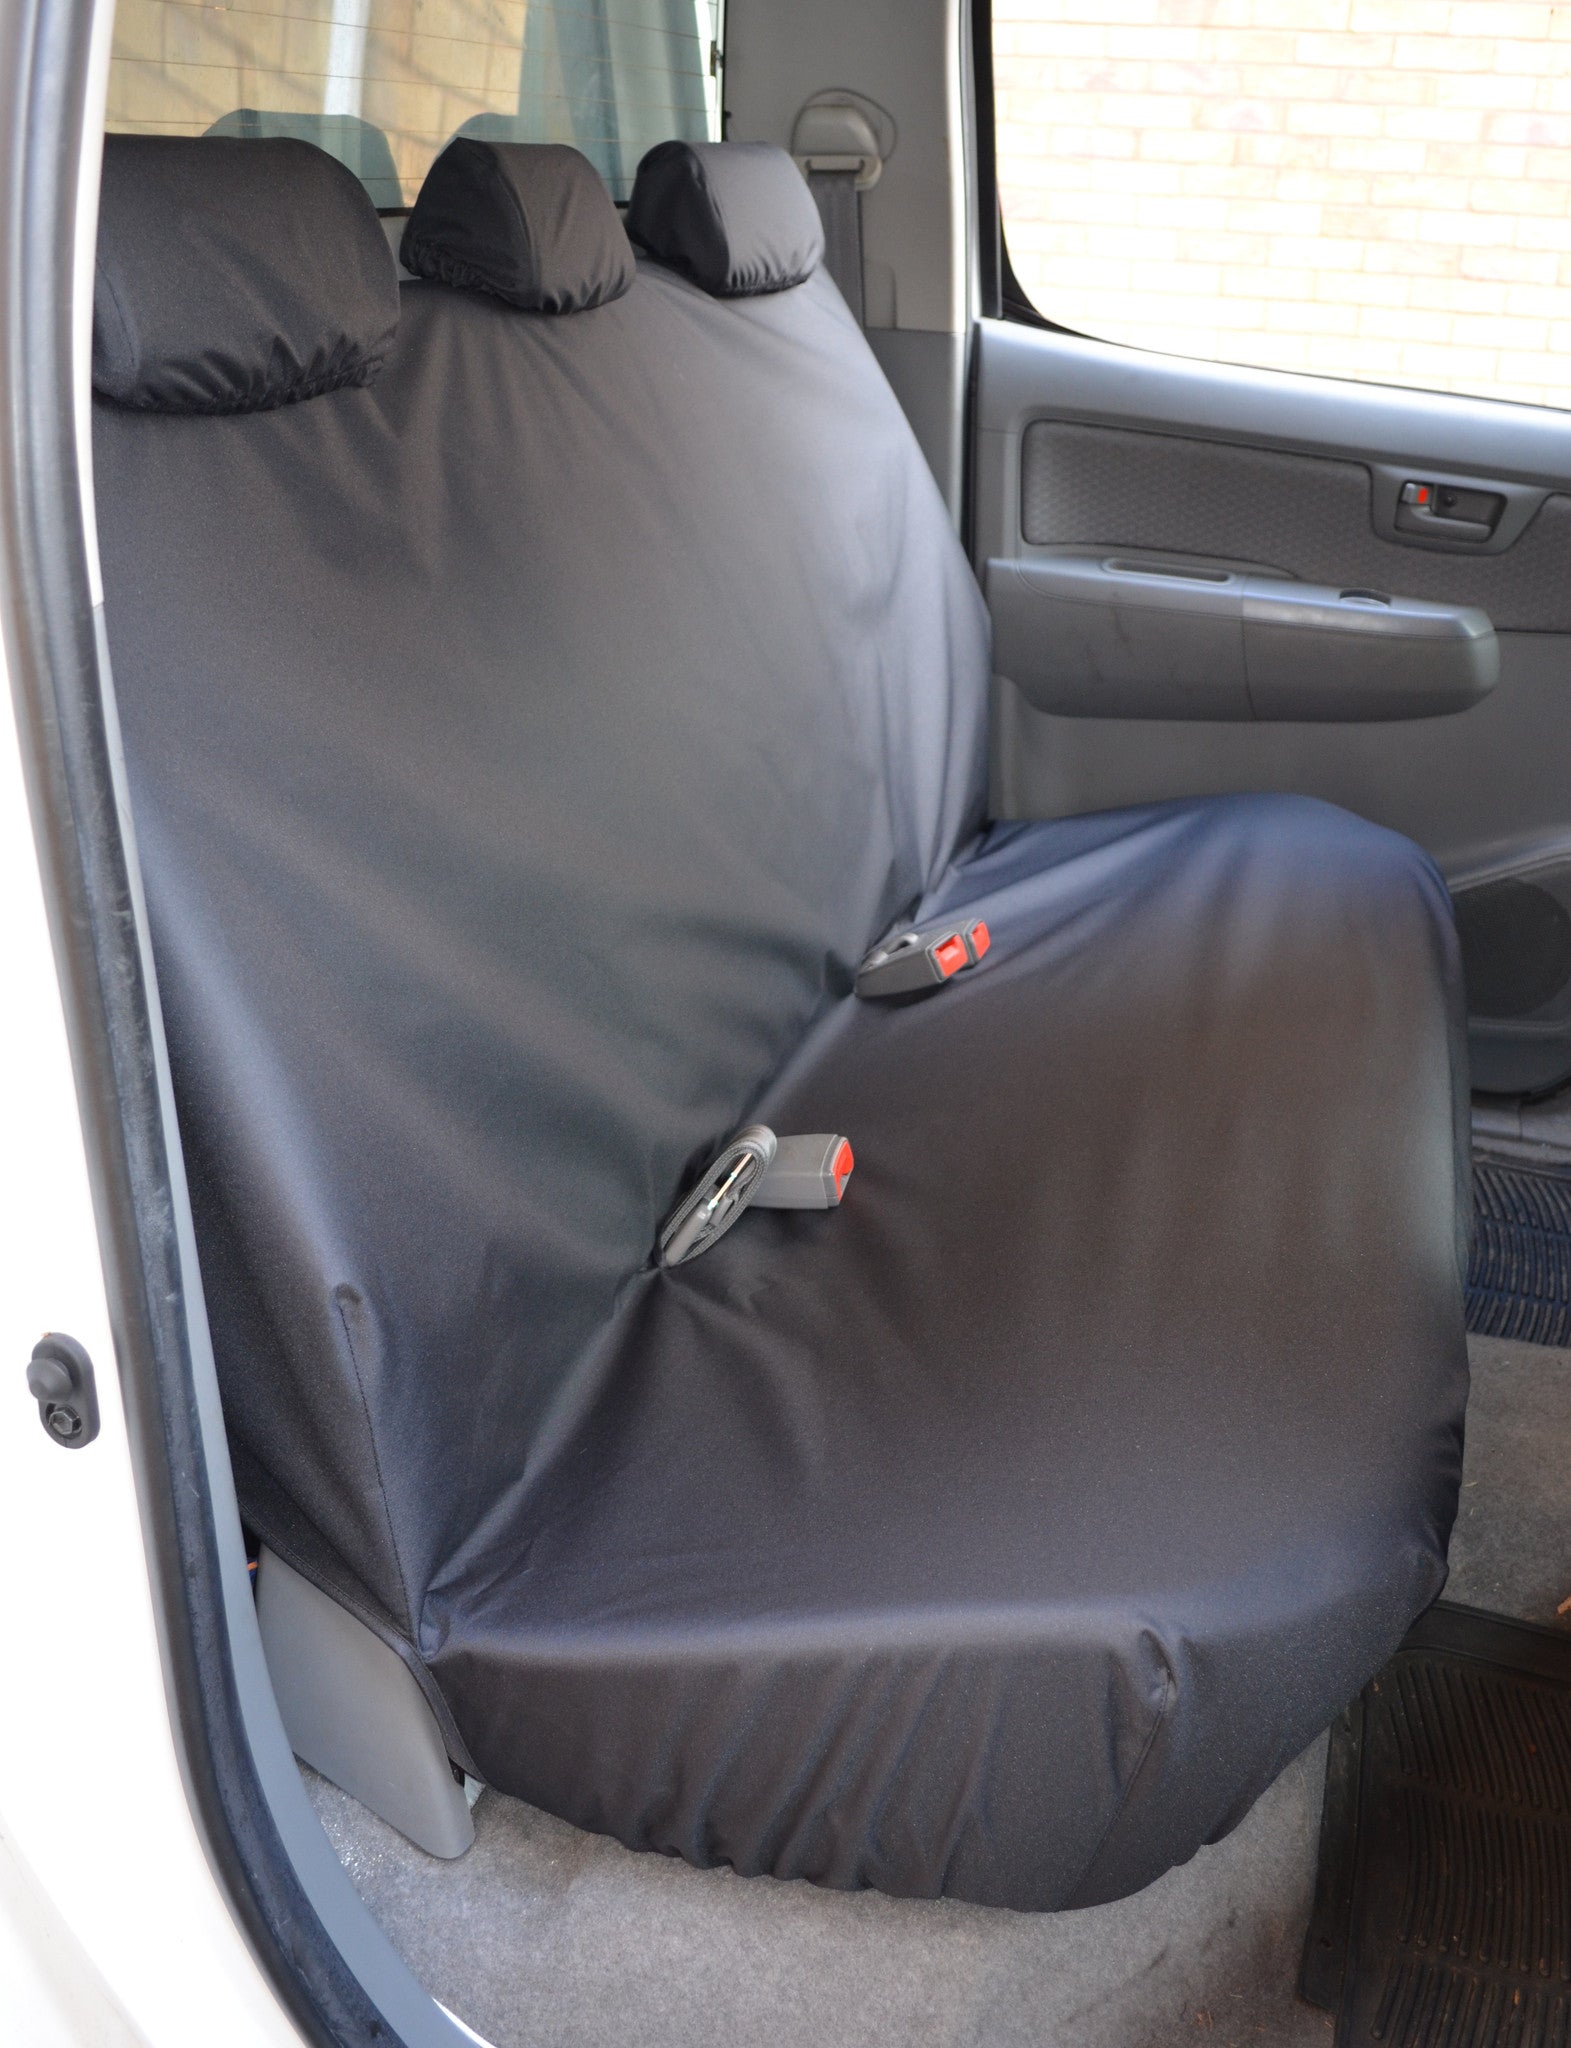 Toyota Hilux Invincible 2005 - 2016 Seat Covers Rear Seat Cover / Black Turtle Covers Ltd